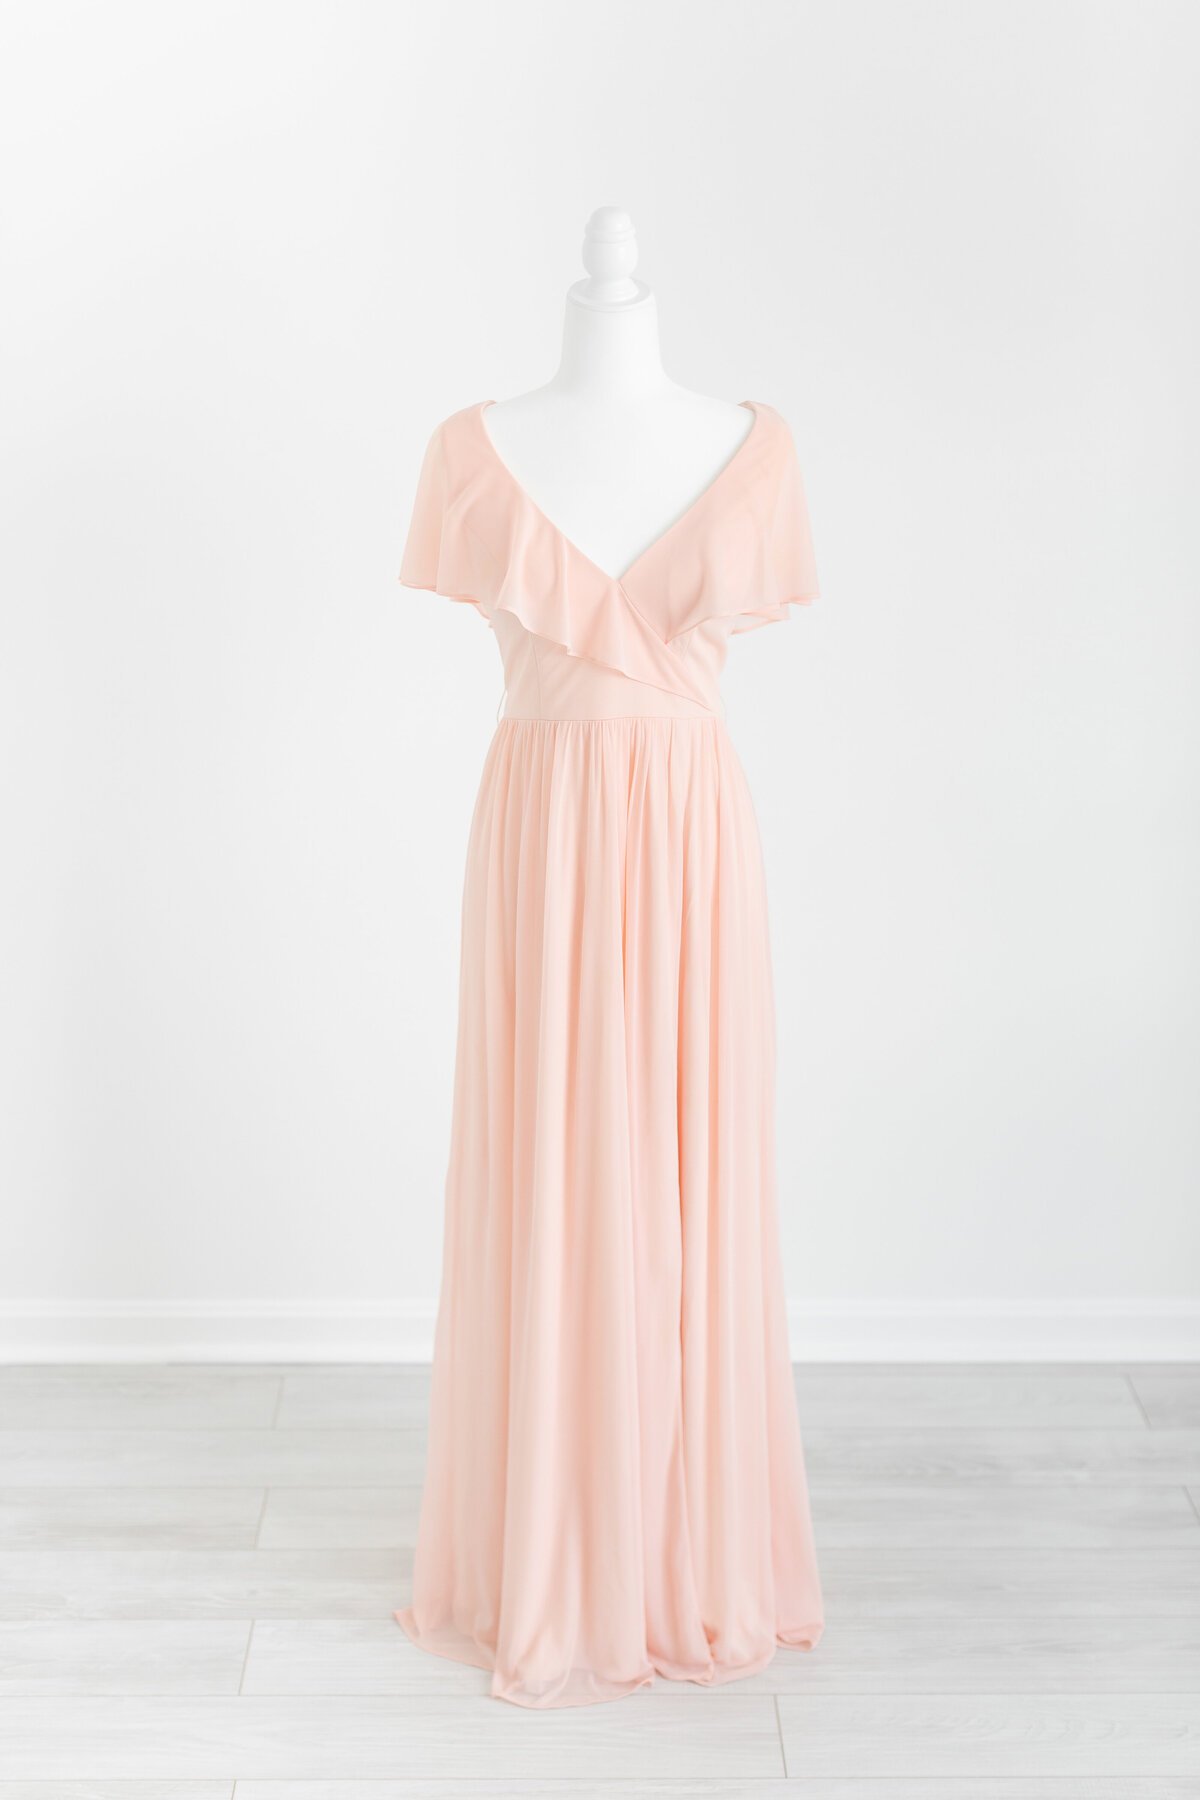 A salmon colored dress from our studio wardrobe